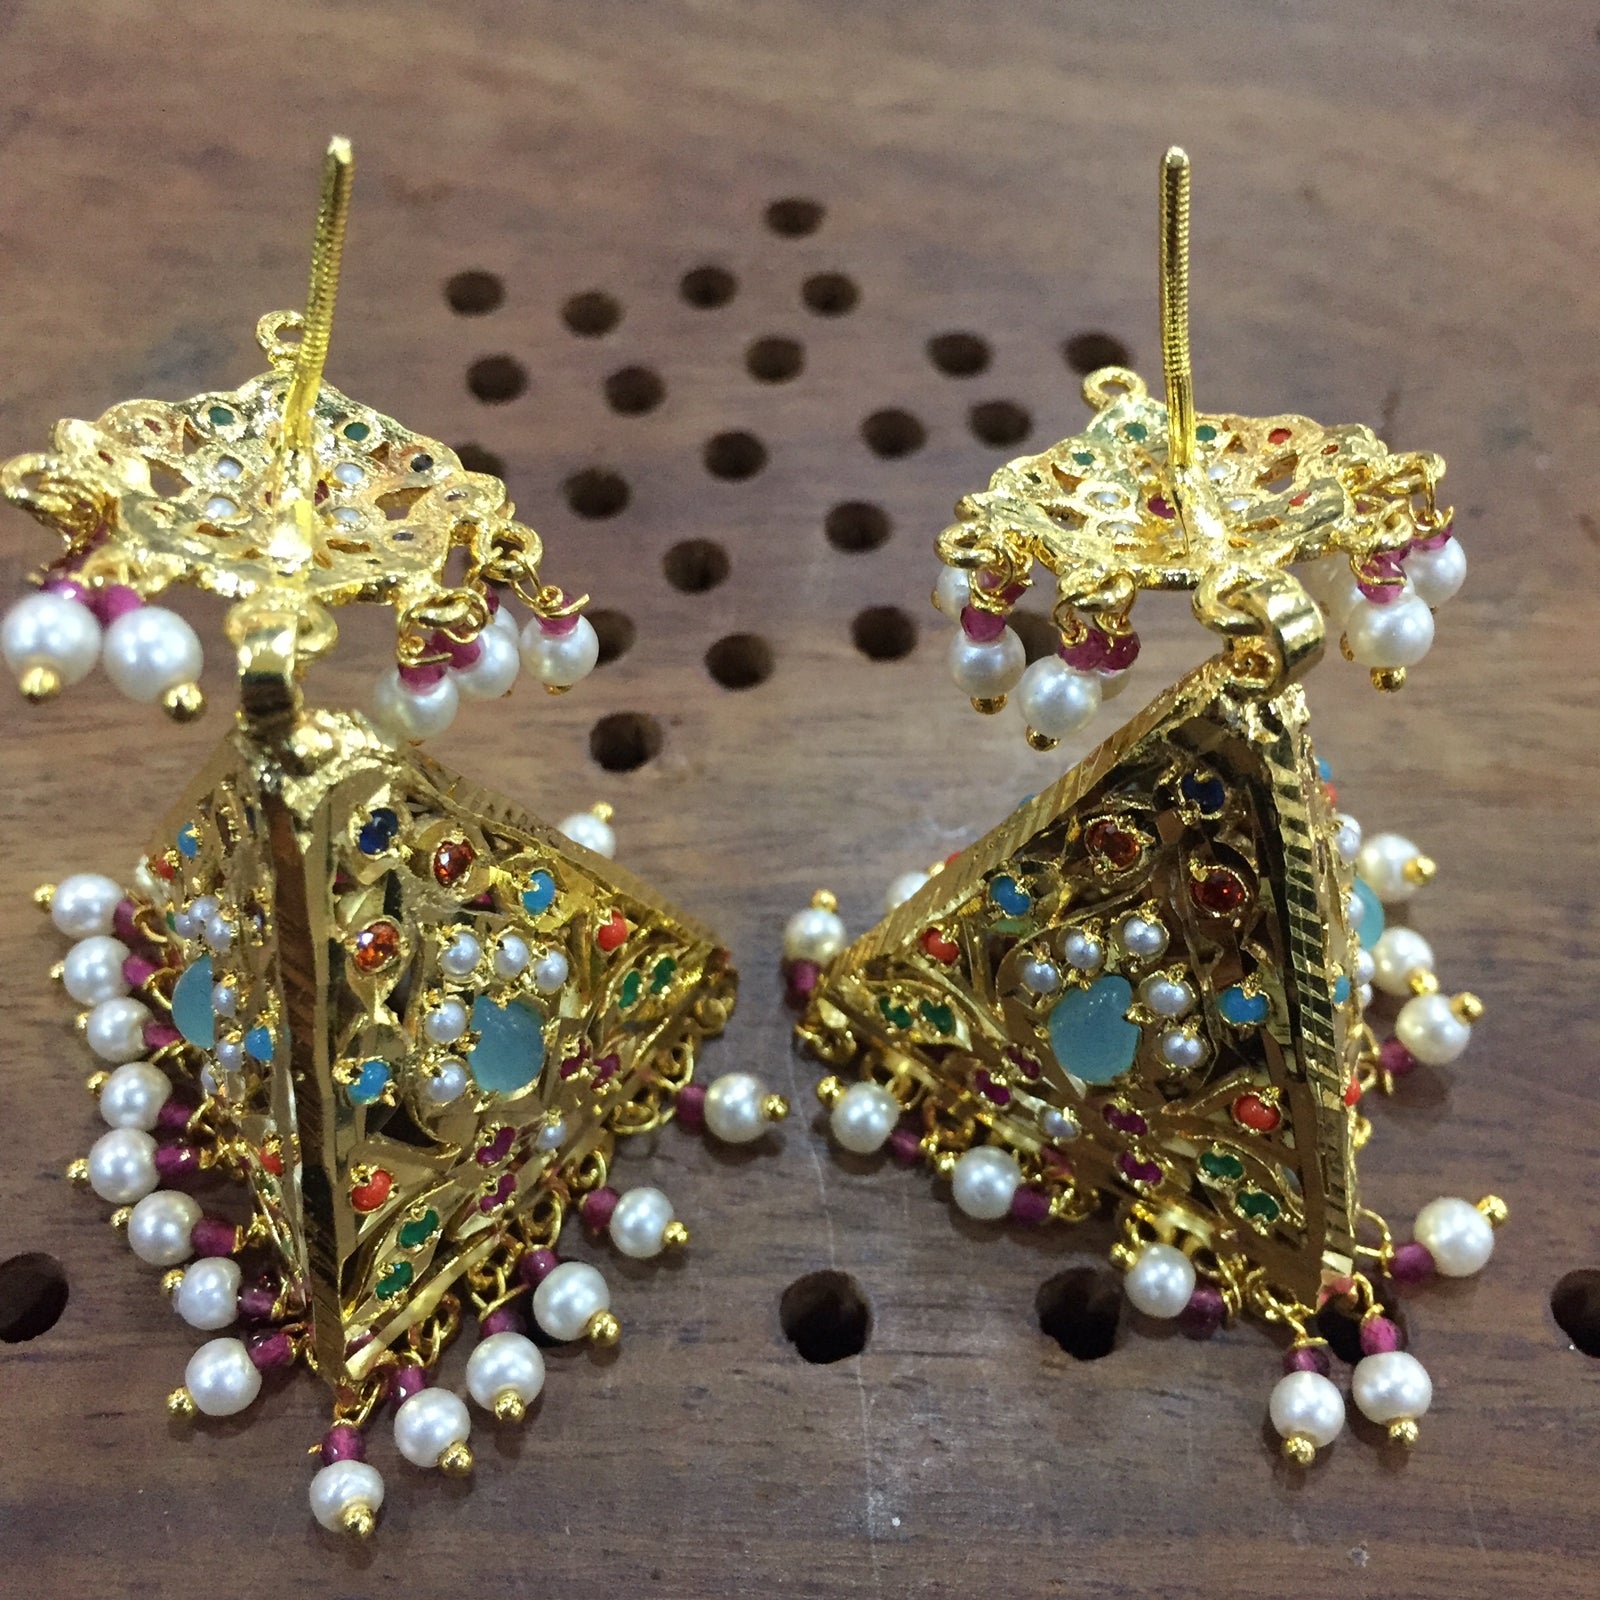 Rajasthani Jewelry | 22k Gold | Gold Plated Silver